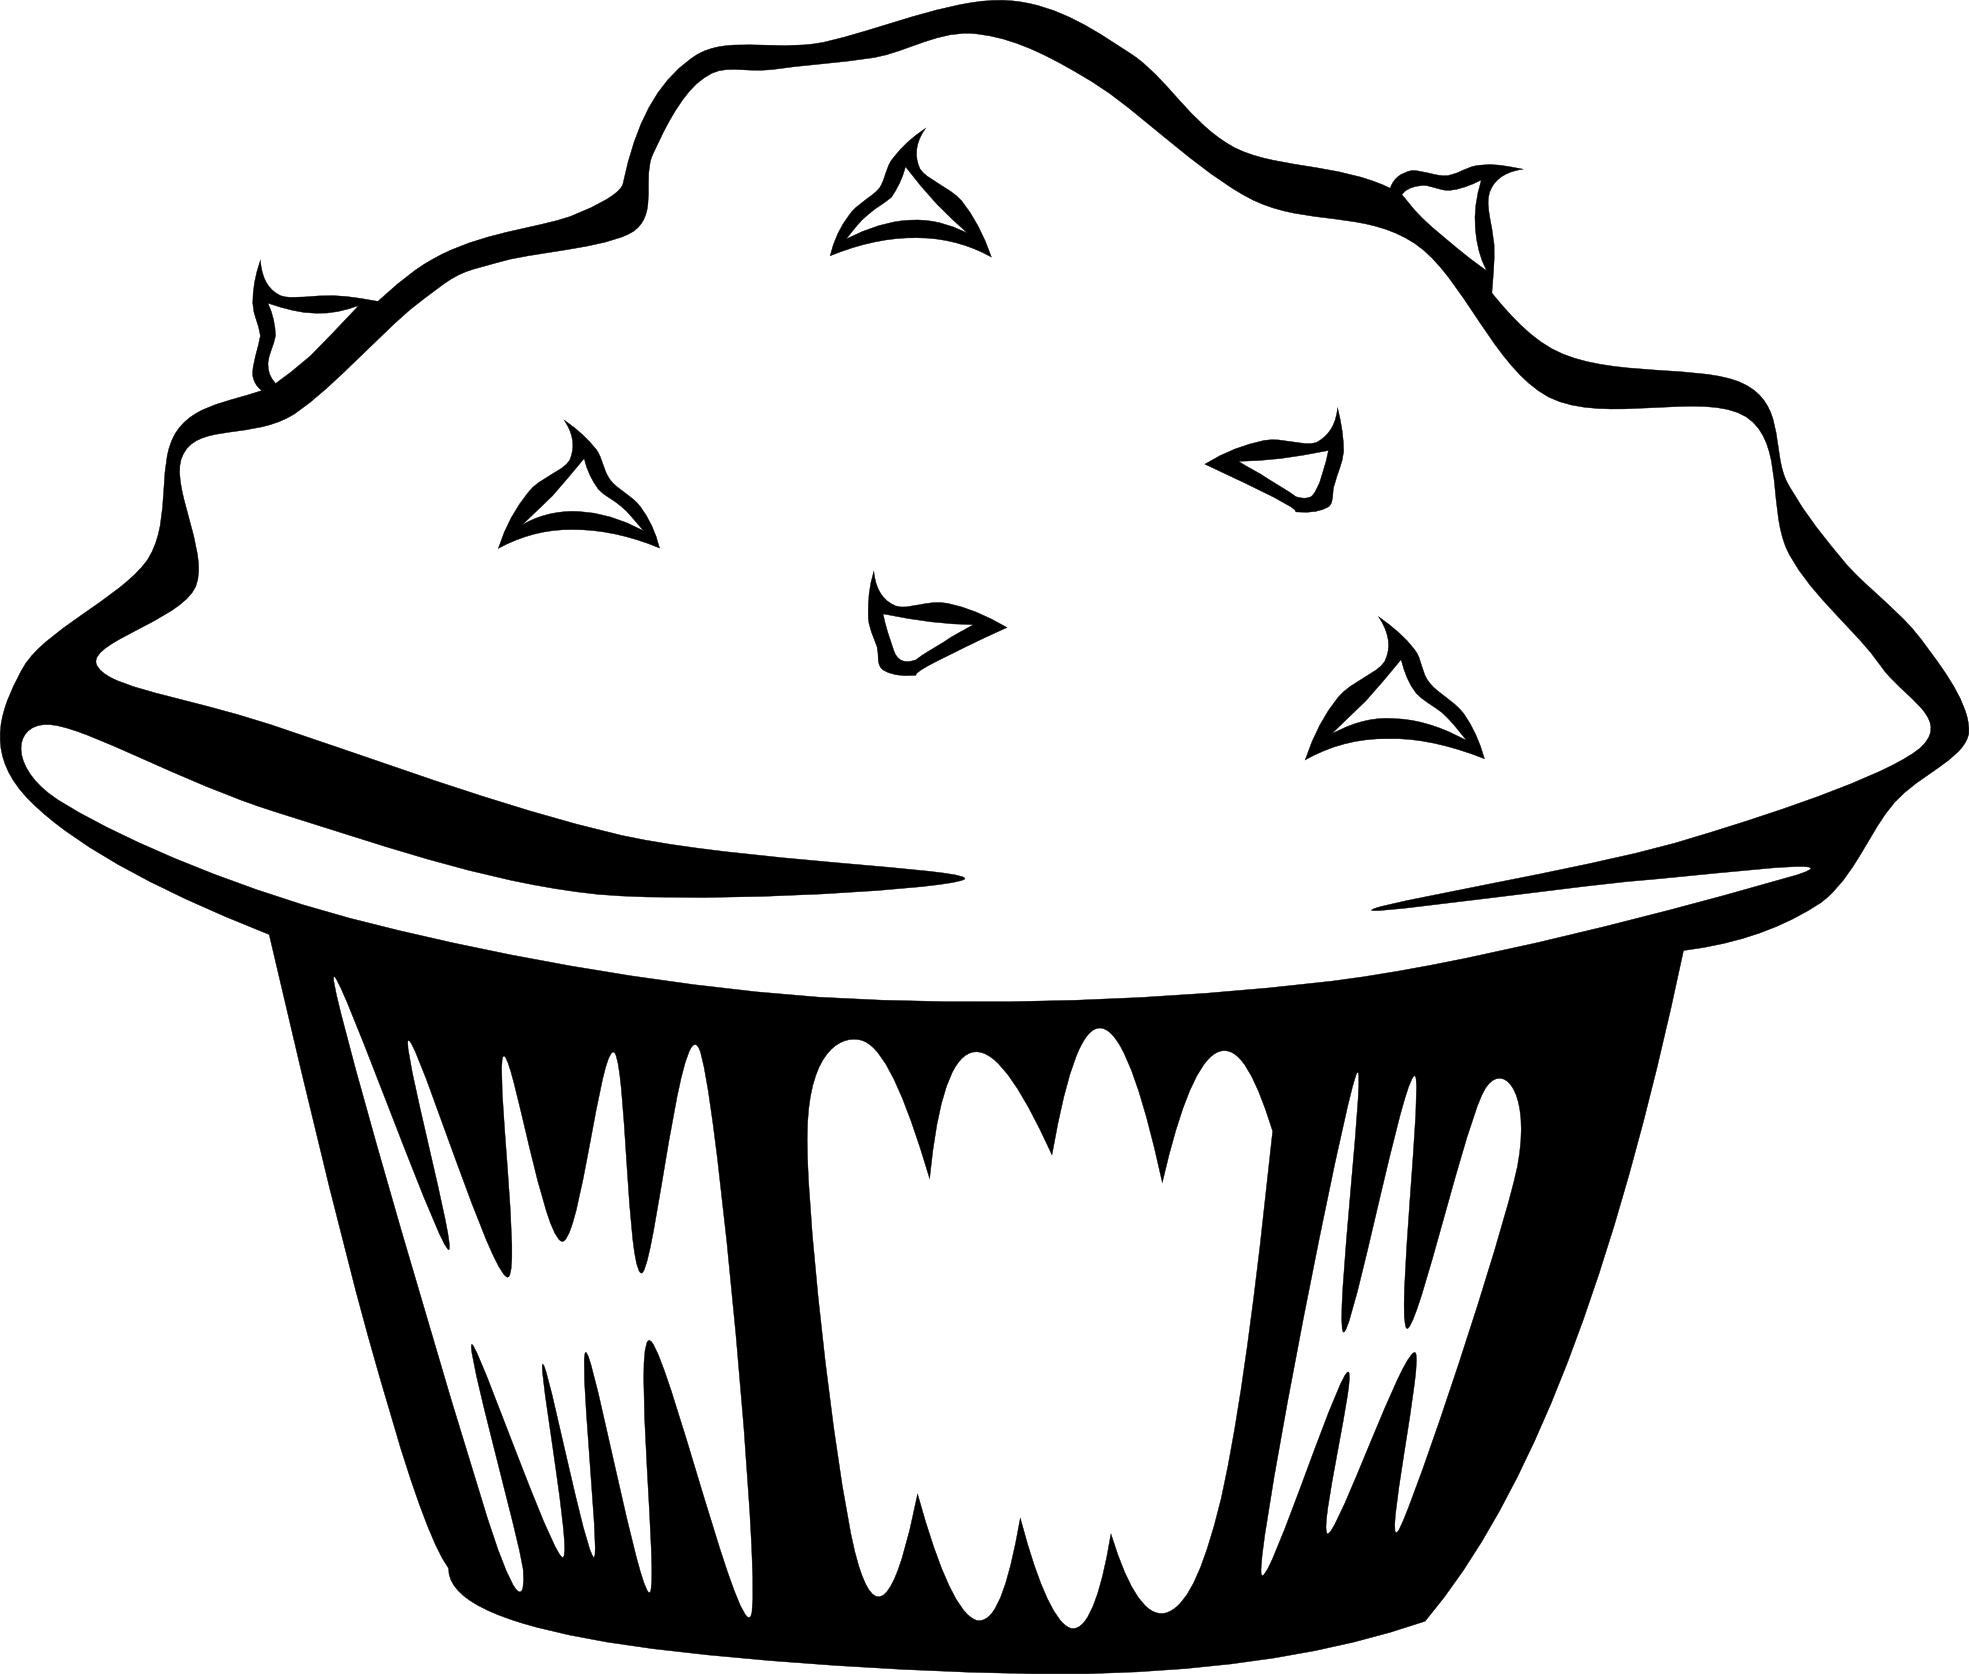 Blank Cake Birthday Black and White Food Clipart